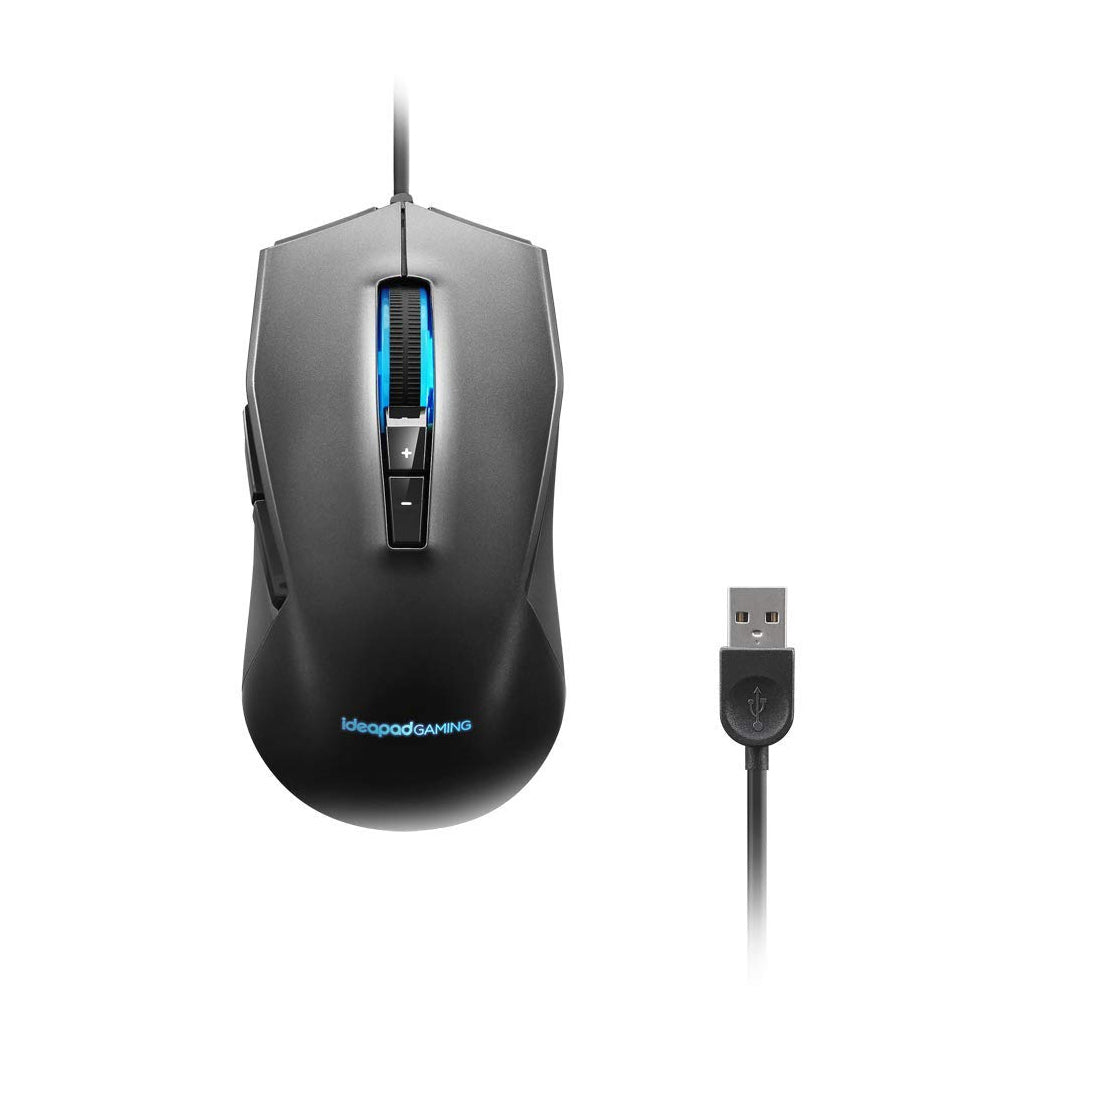 Lenovo Ideapad M100 RGB Gaming Mouse with Optical Pixart Sensor 7 Buttons and Adjustable DPI Up to 3200